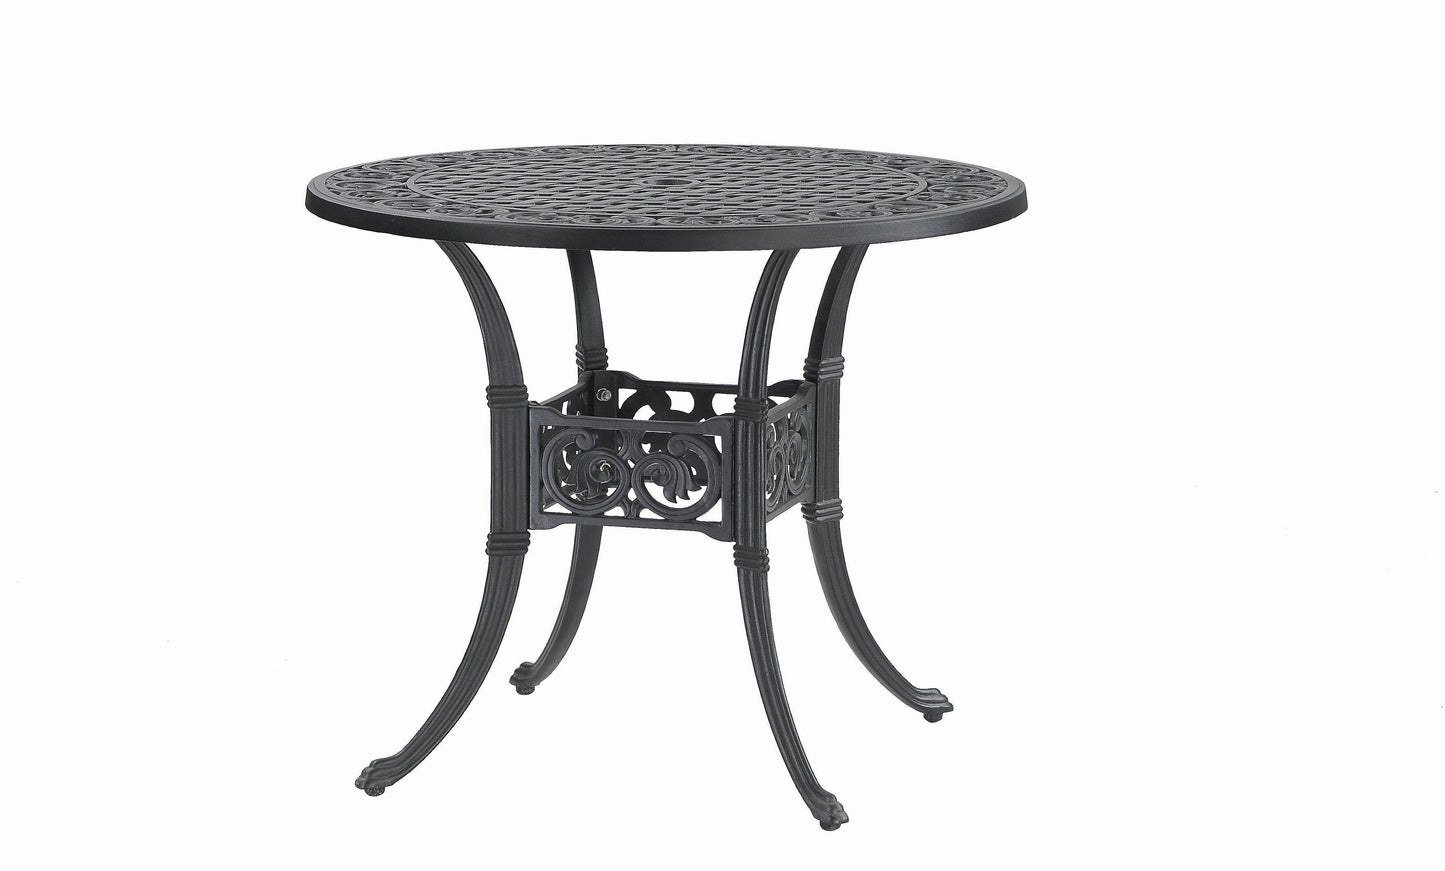 Click to View all Michigan Tables & Accessories